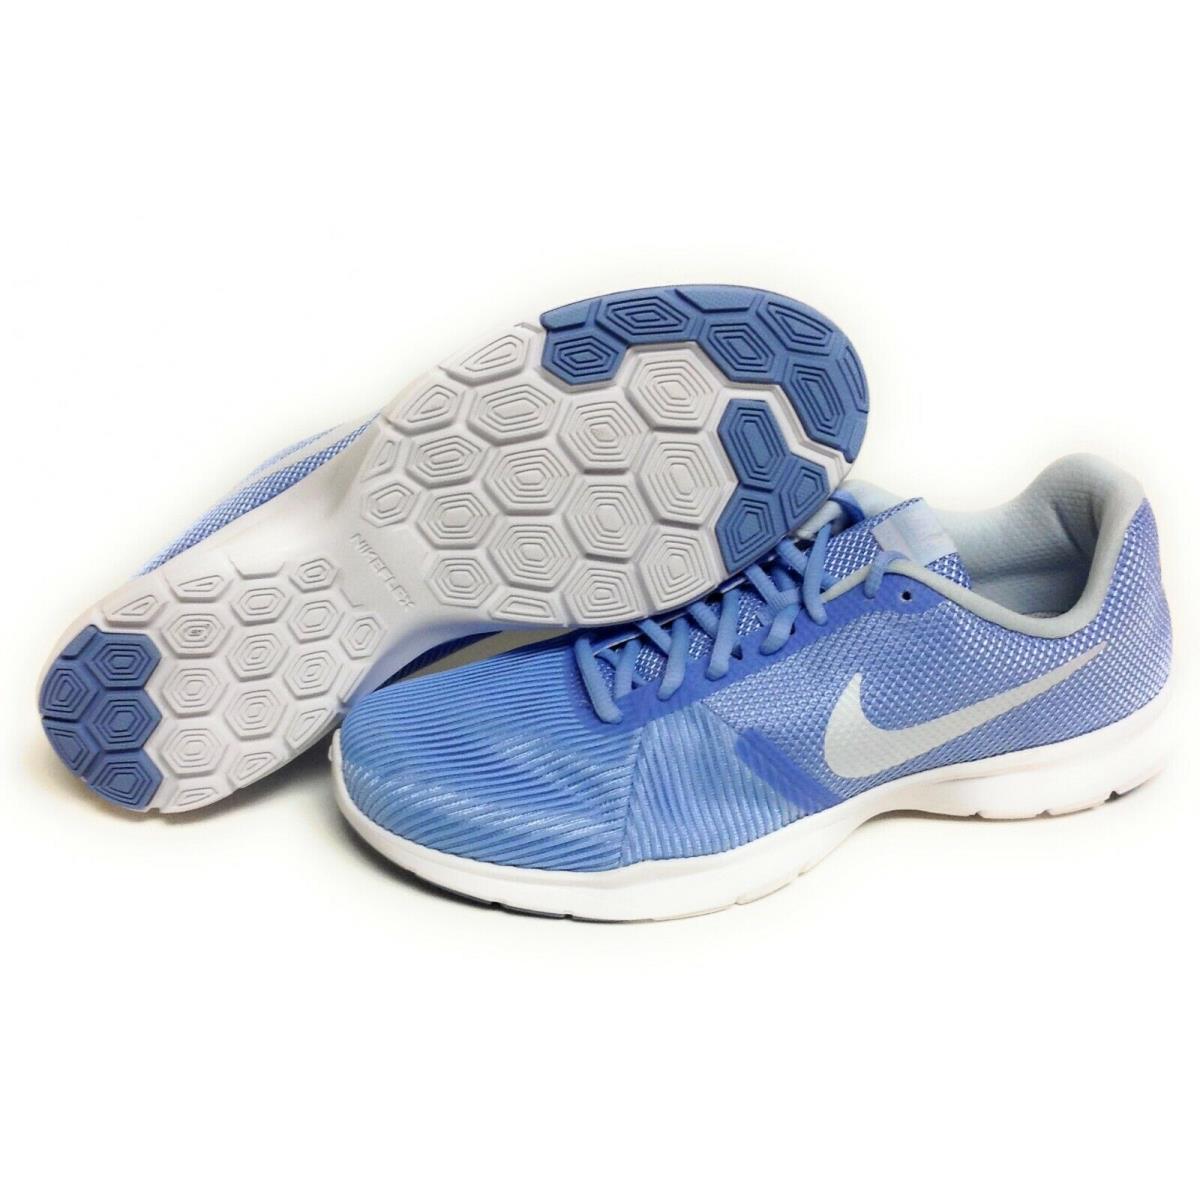 Womens Nike Bijoux 881863 400 Pale Blue White Running Sneakers Shoes